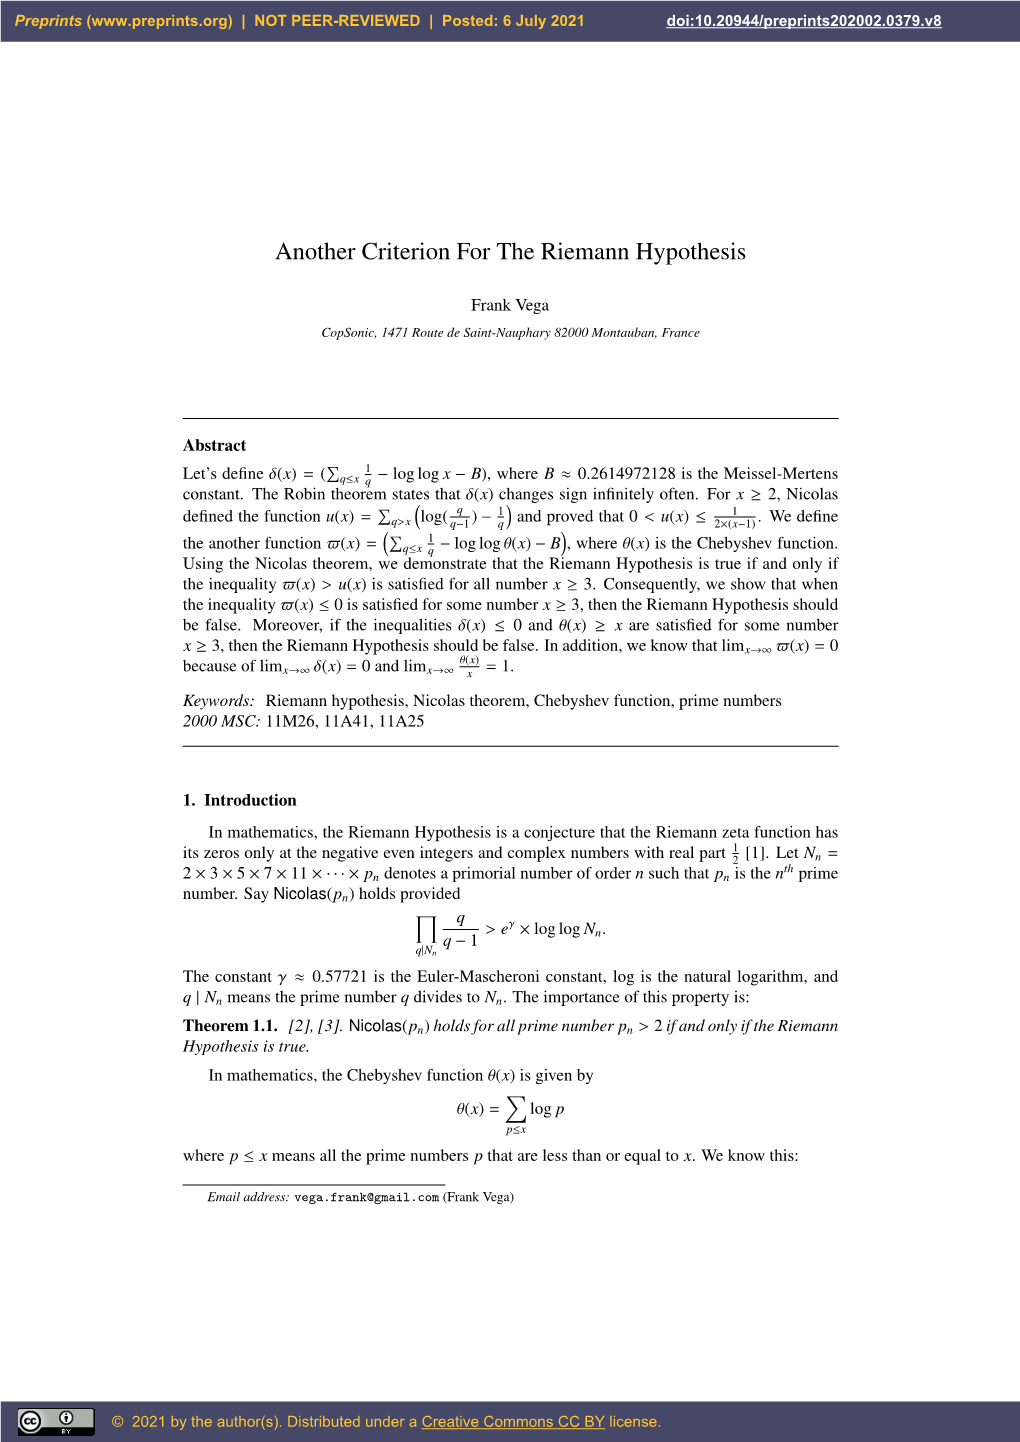 Another Criterion for the Riemann Hypothesis